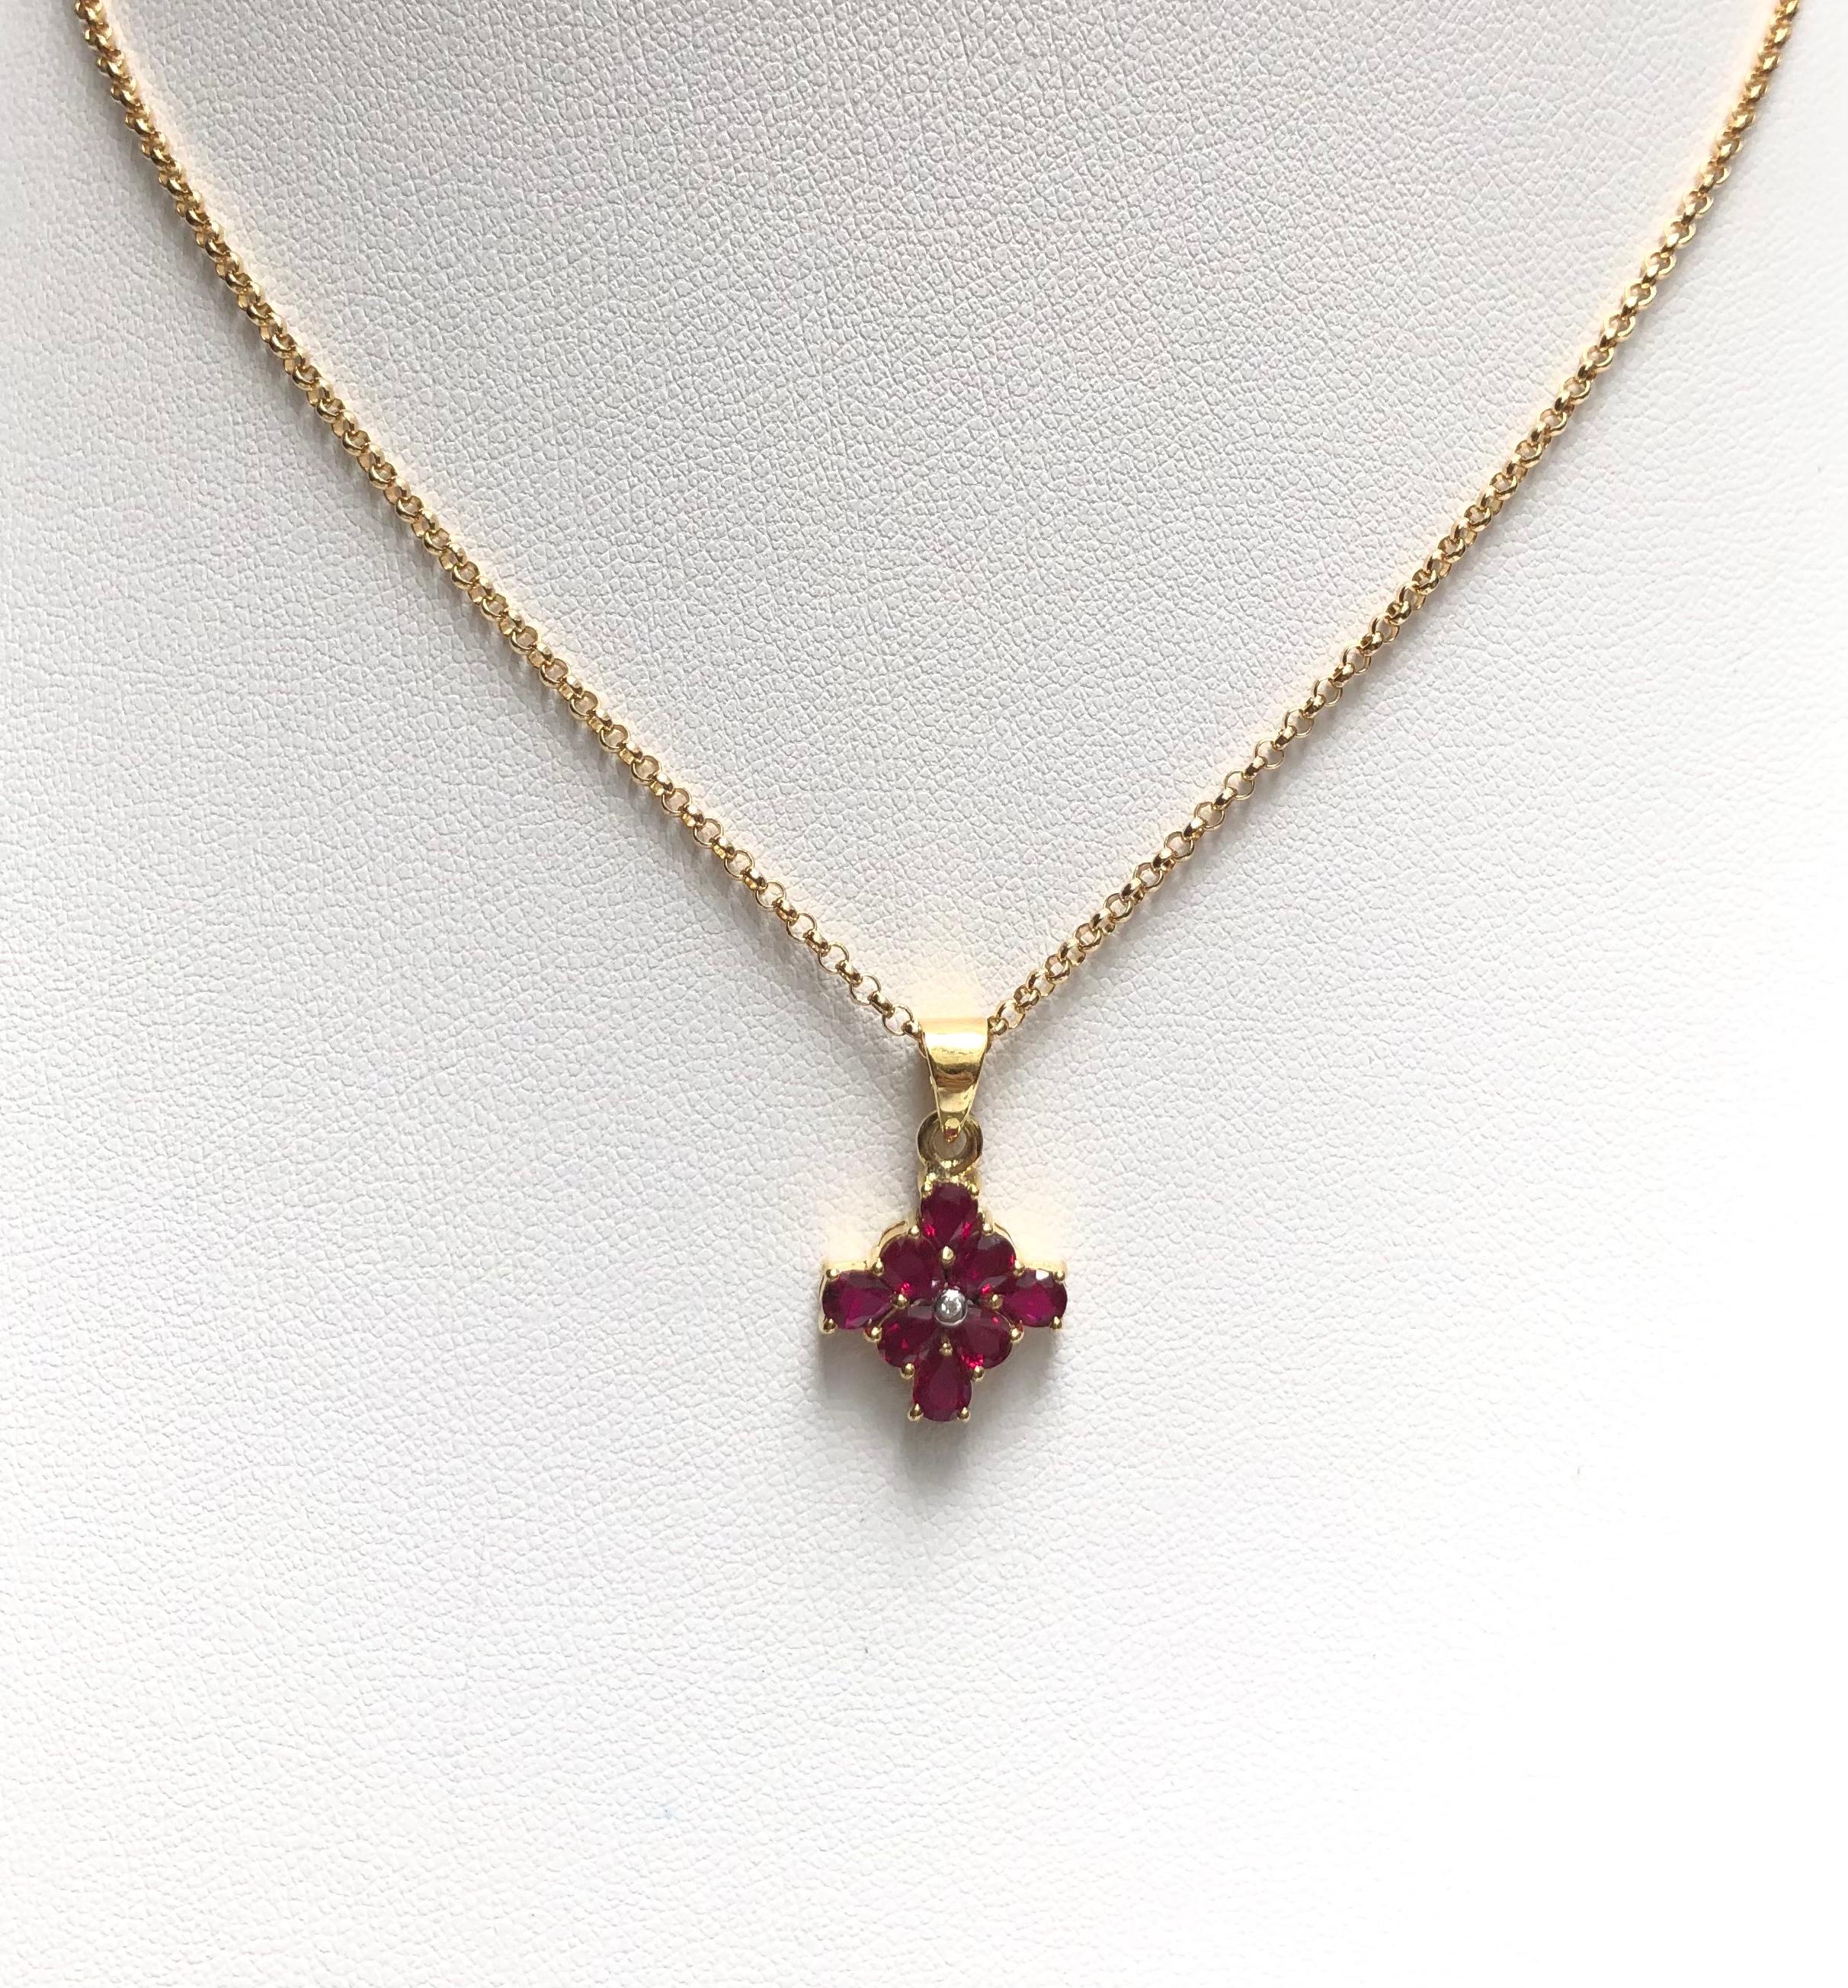 Ruby 1.40 carats with Diamond 0.01 carat Pendant set in 18 Karat Gold Settings
(chain not included)

Width:  1.4 cm 
Length: 2.1 cm
Total Weight: 2.29 grams

